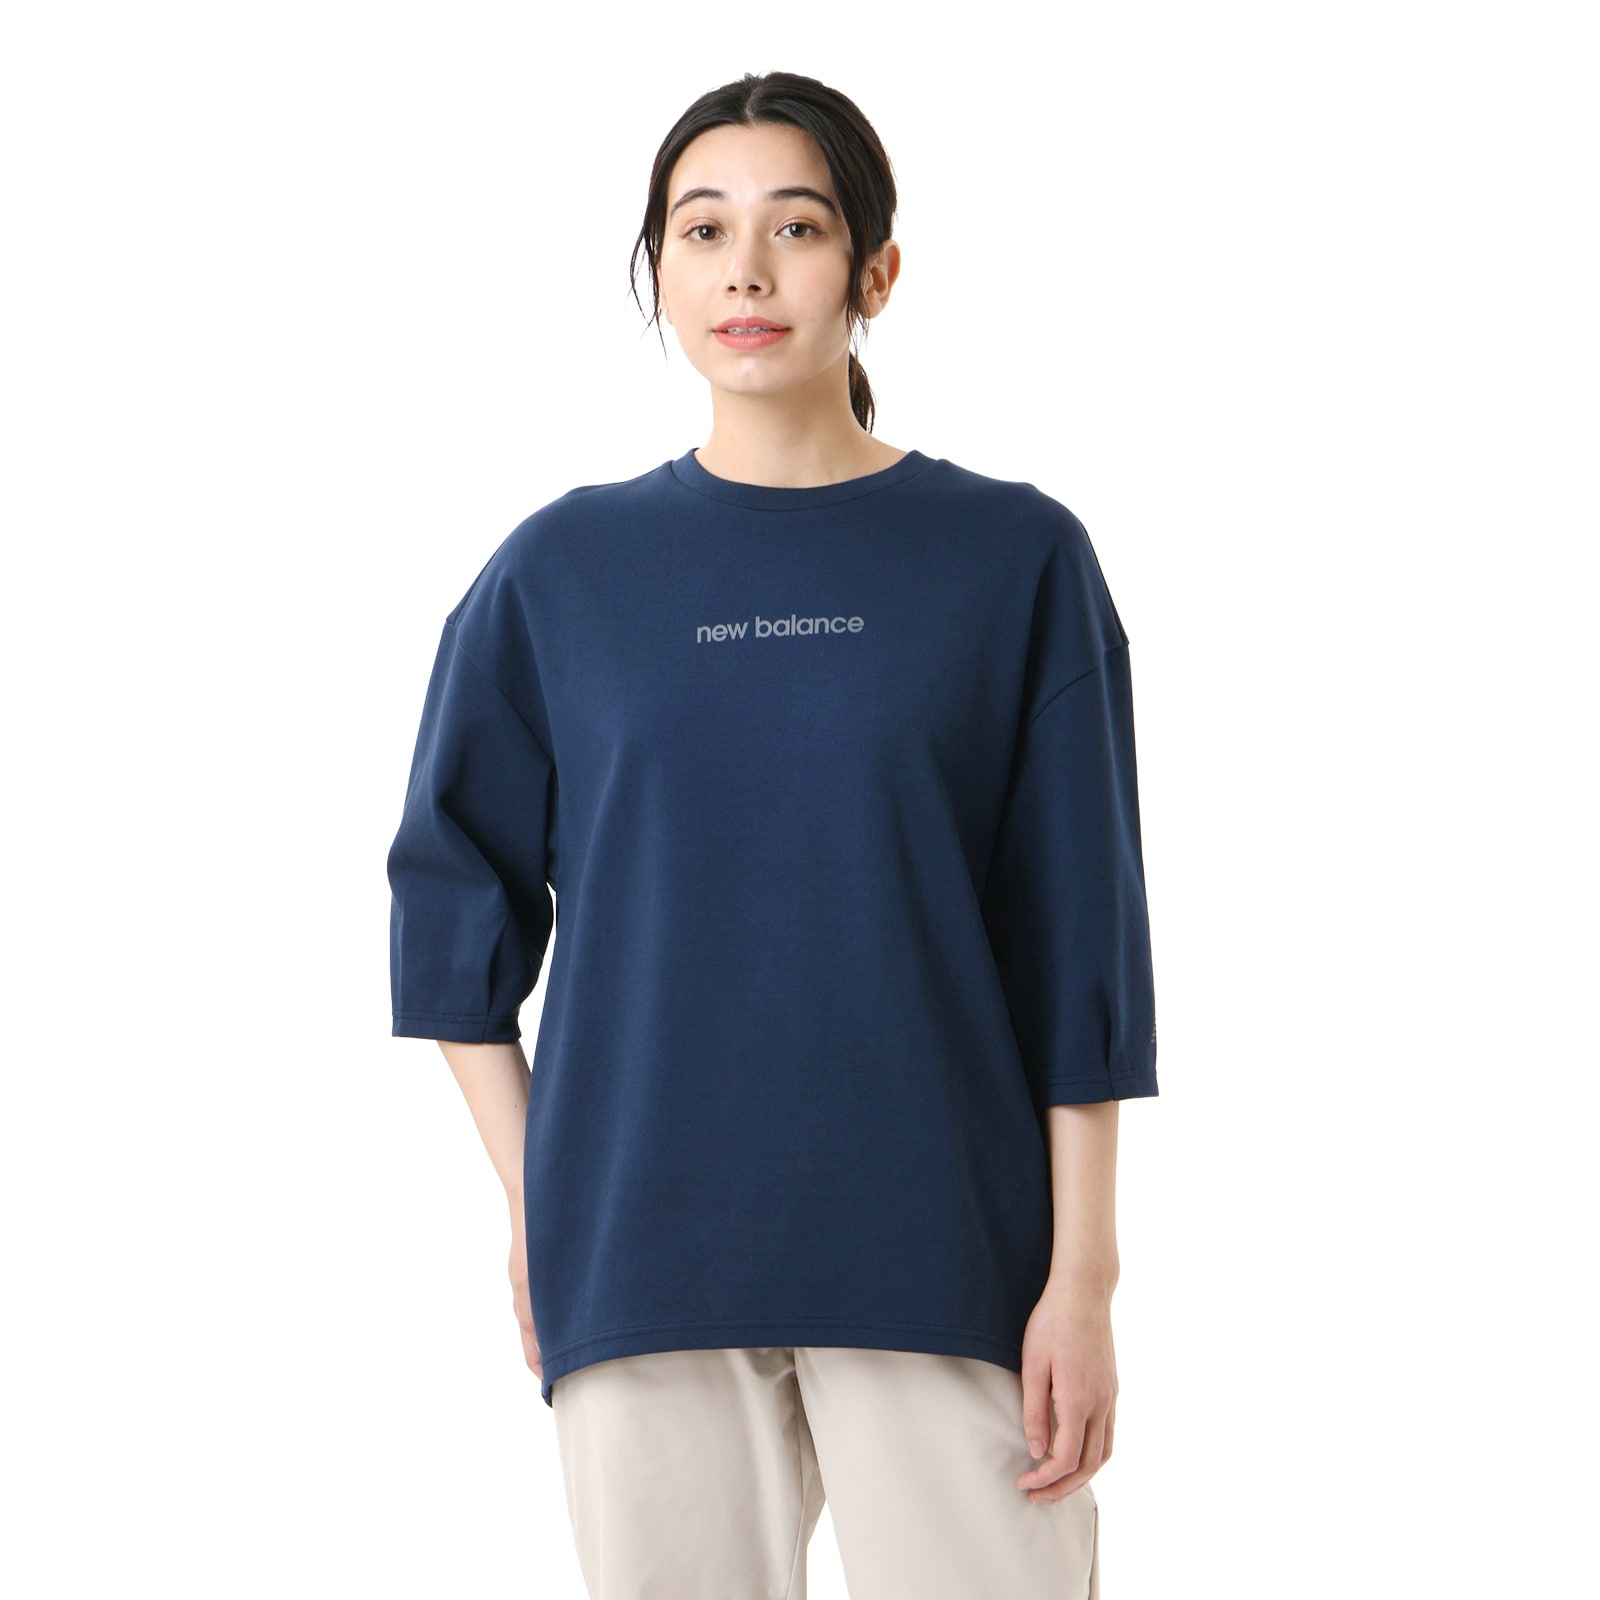 Double Face Pullover